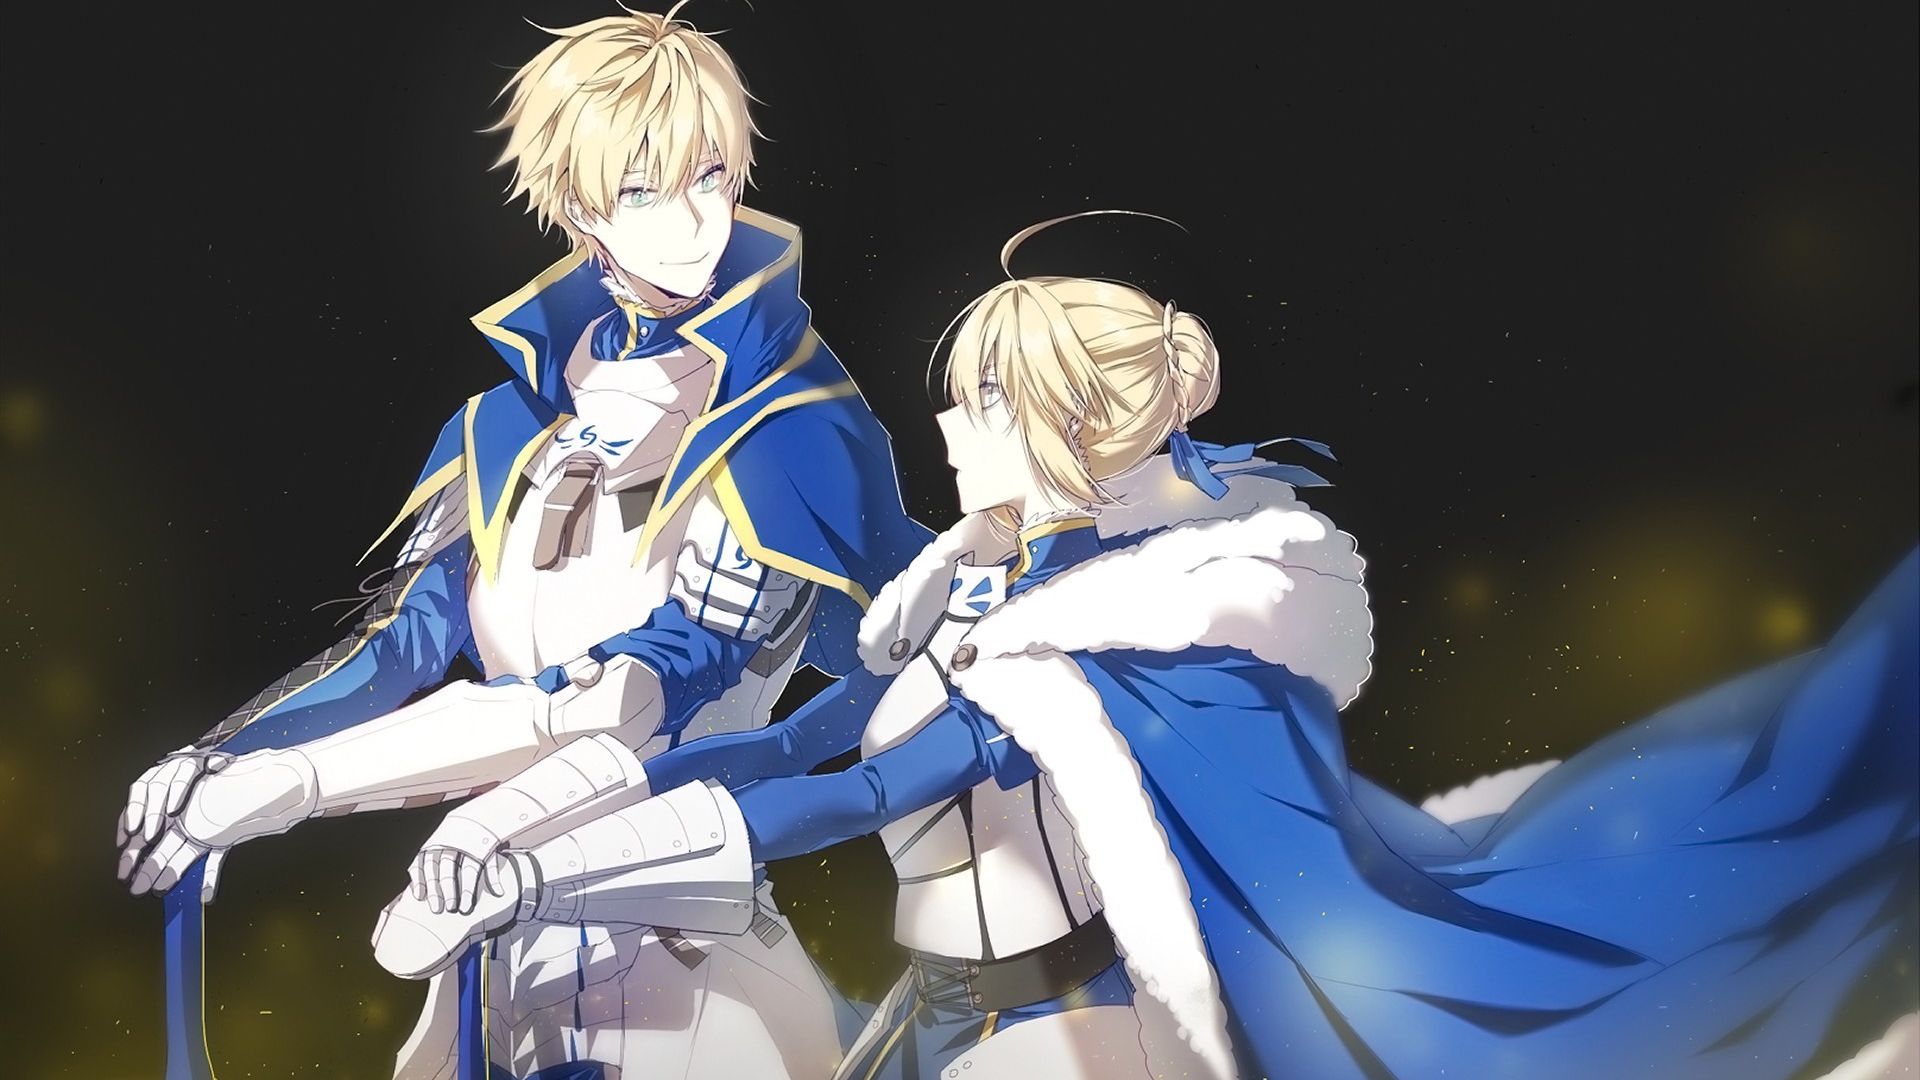 Desktop Wallpaper Saber, Fate Series, Anime Girl, Anime Boy, Hd Image,  Picture, Background, Ac4410